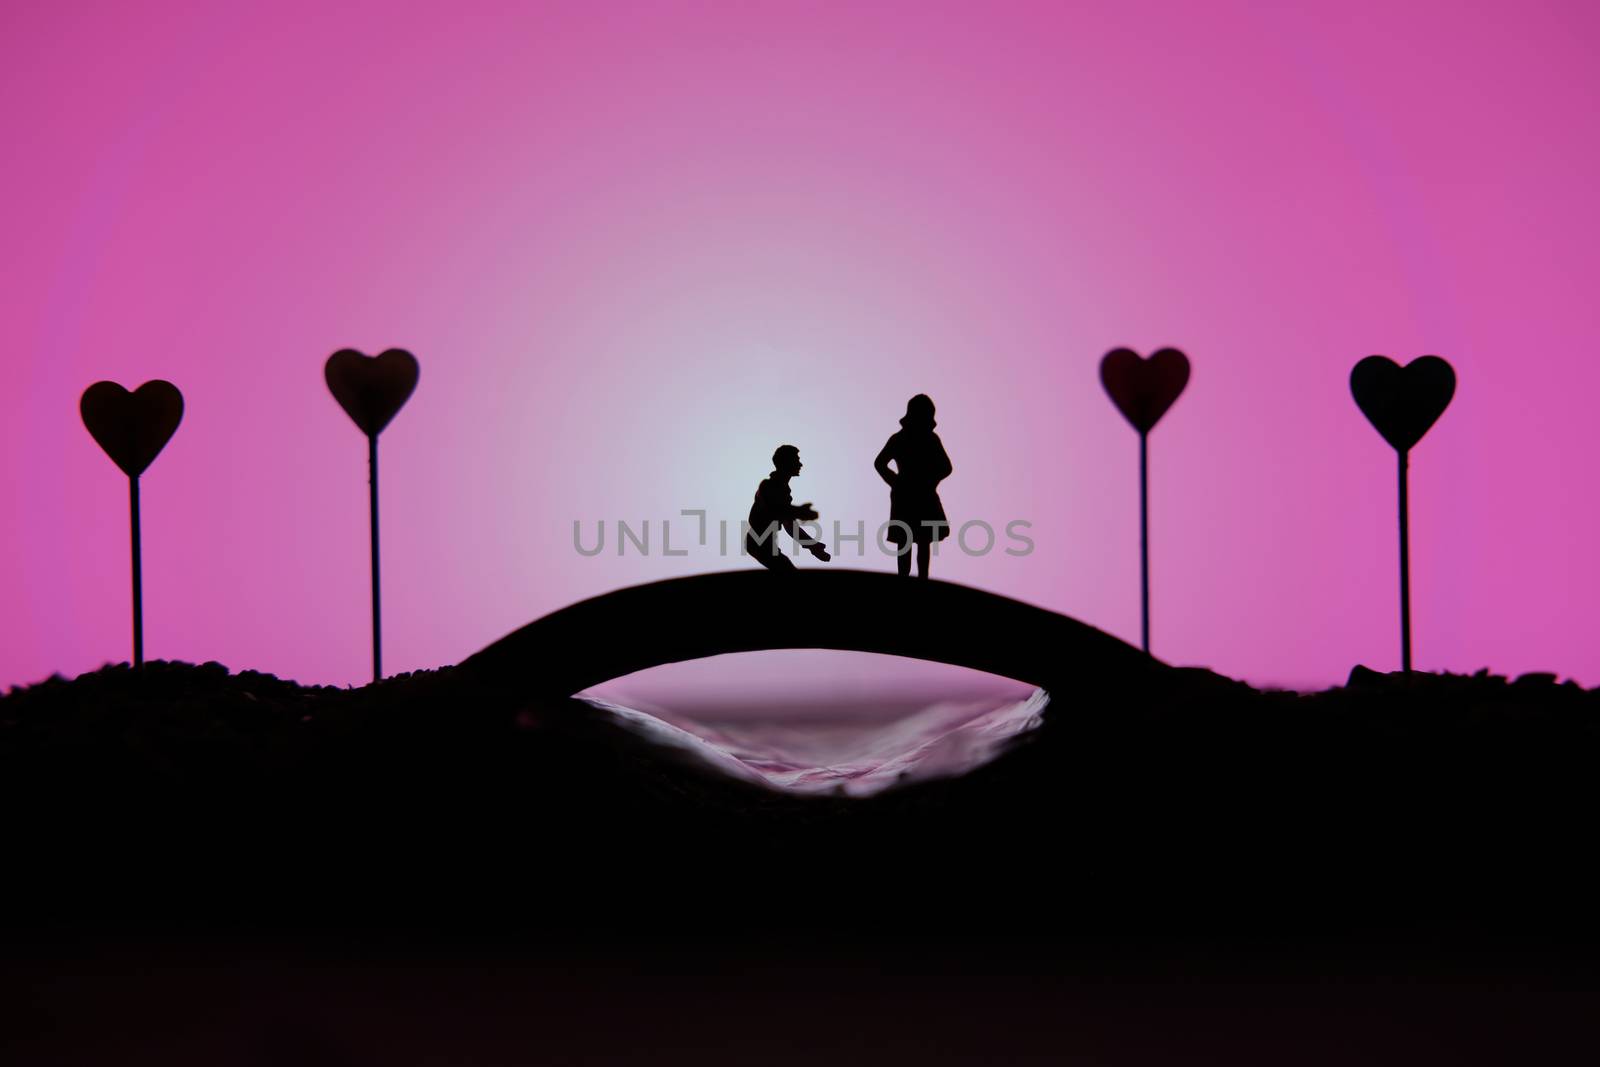 miniature people / toy photography - conceptual valentine holiday illustration. A man proposing a girl silhouette above the bridge with heart lamp by Macrostud